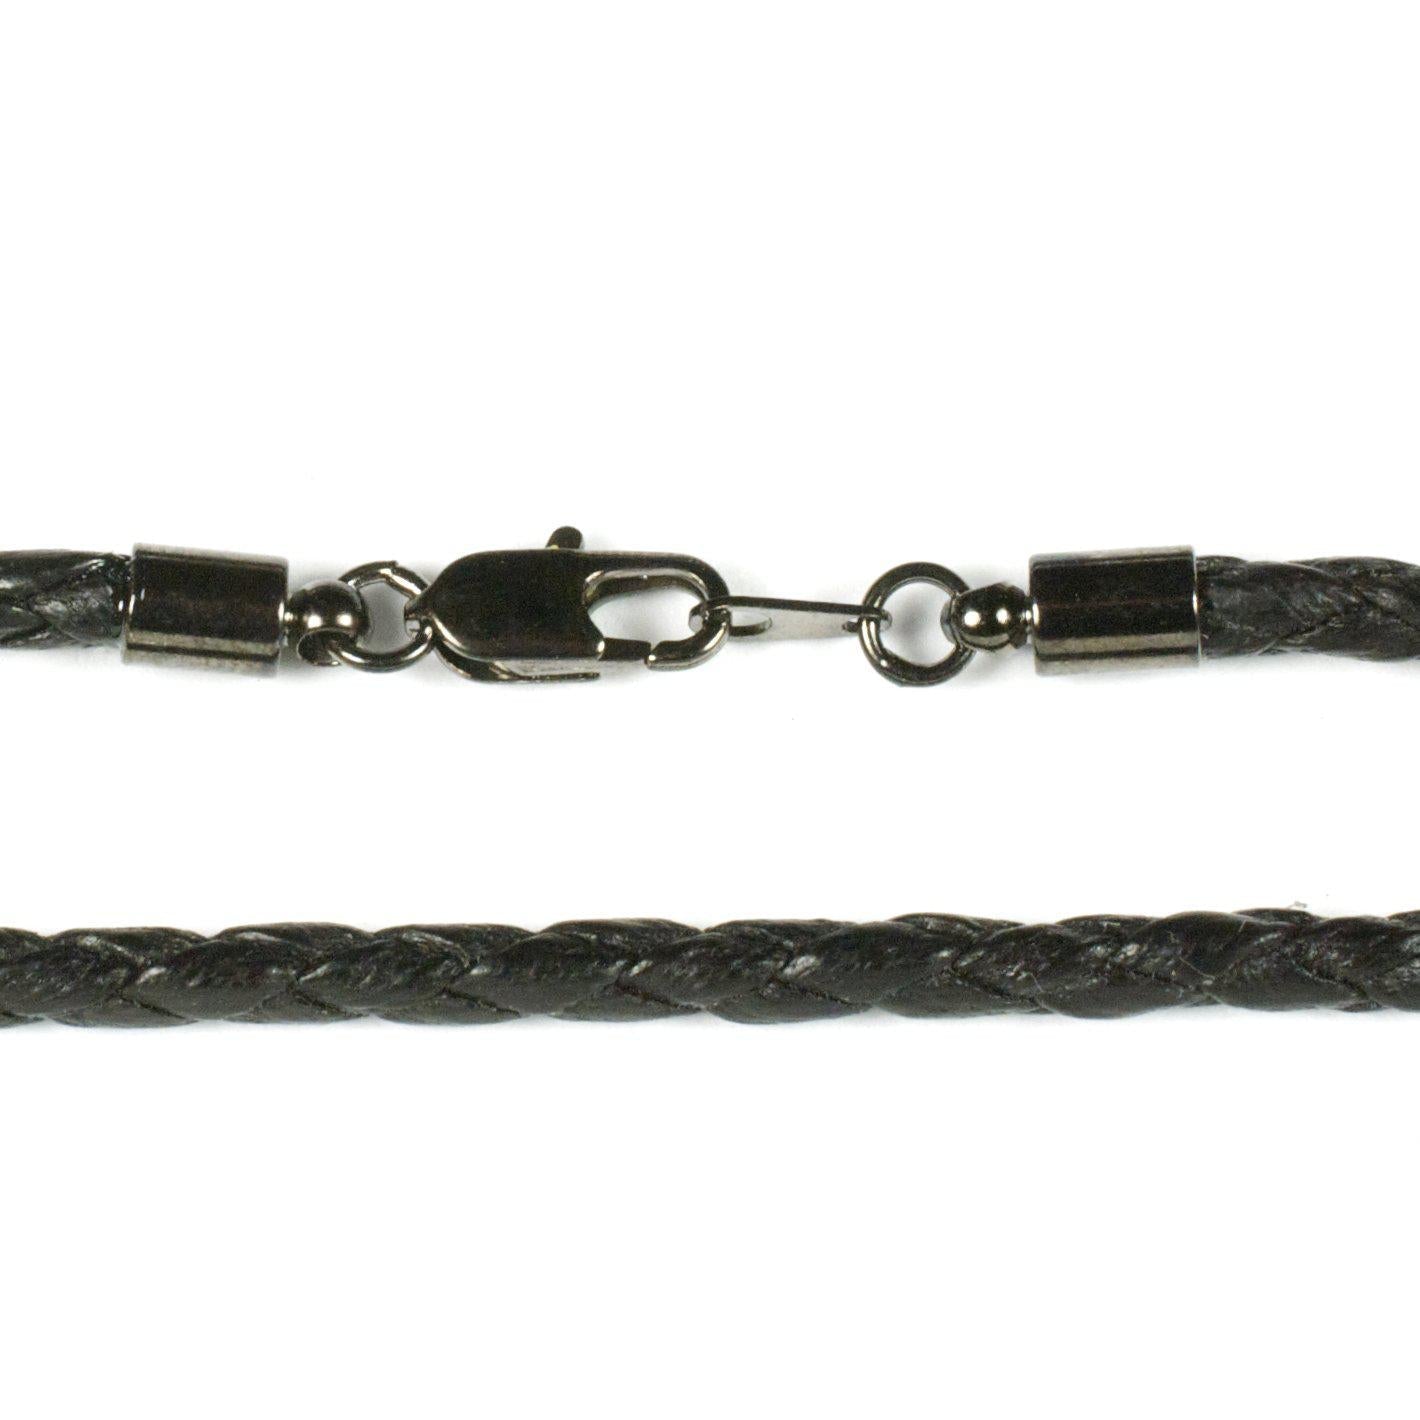 3mm Black Braided Cotton Cord with Hematite Finish Ends - The Tool Store